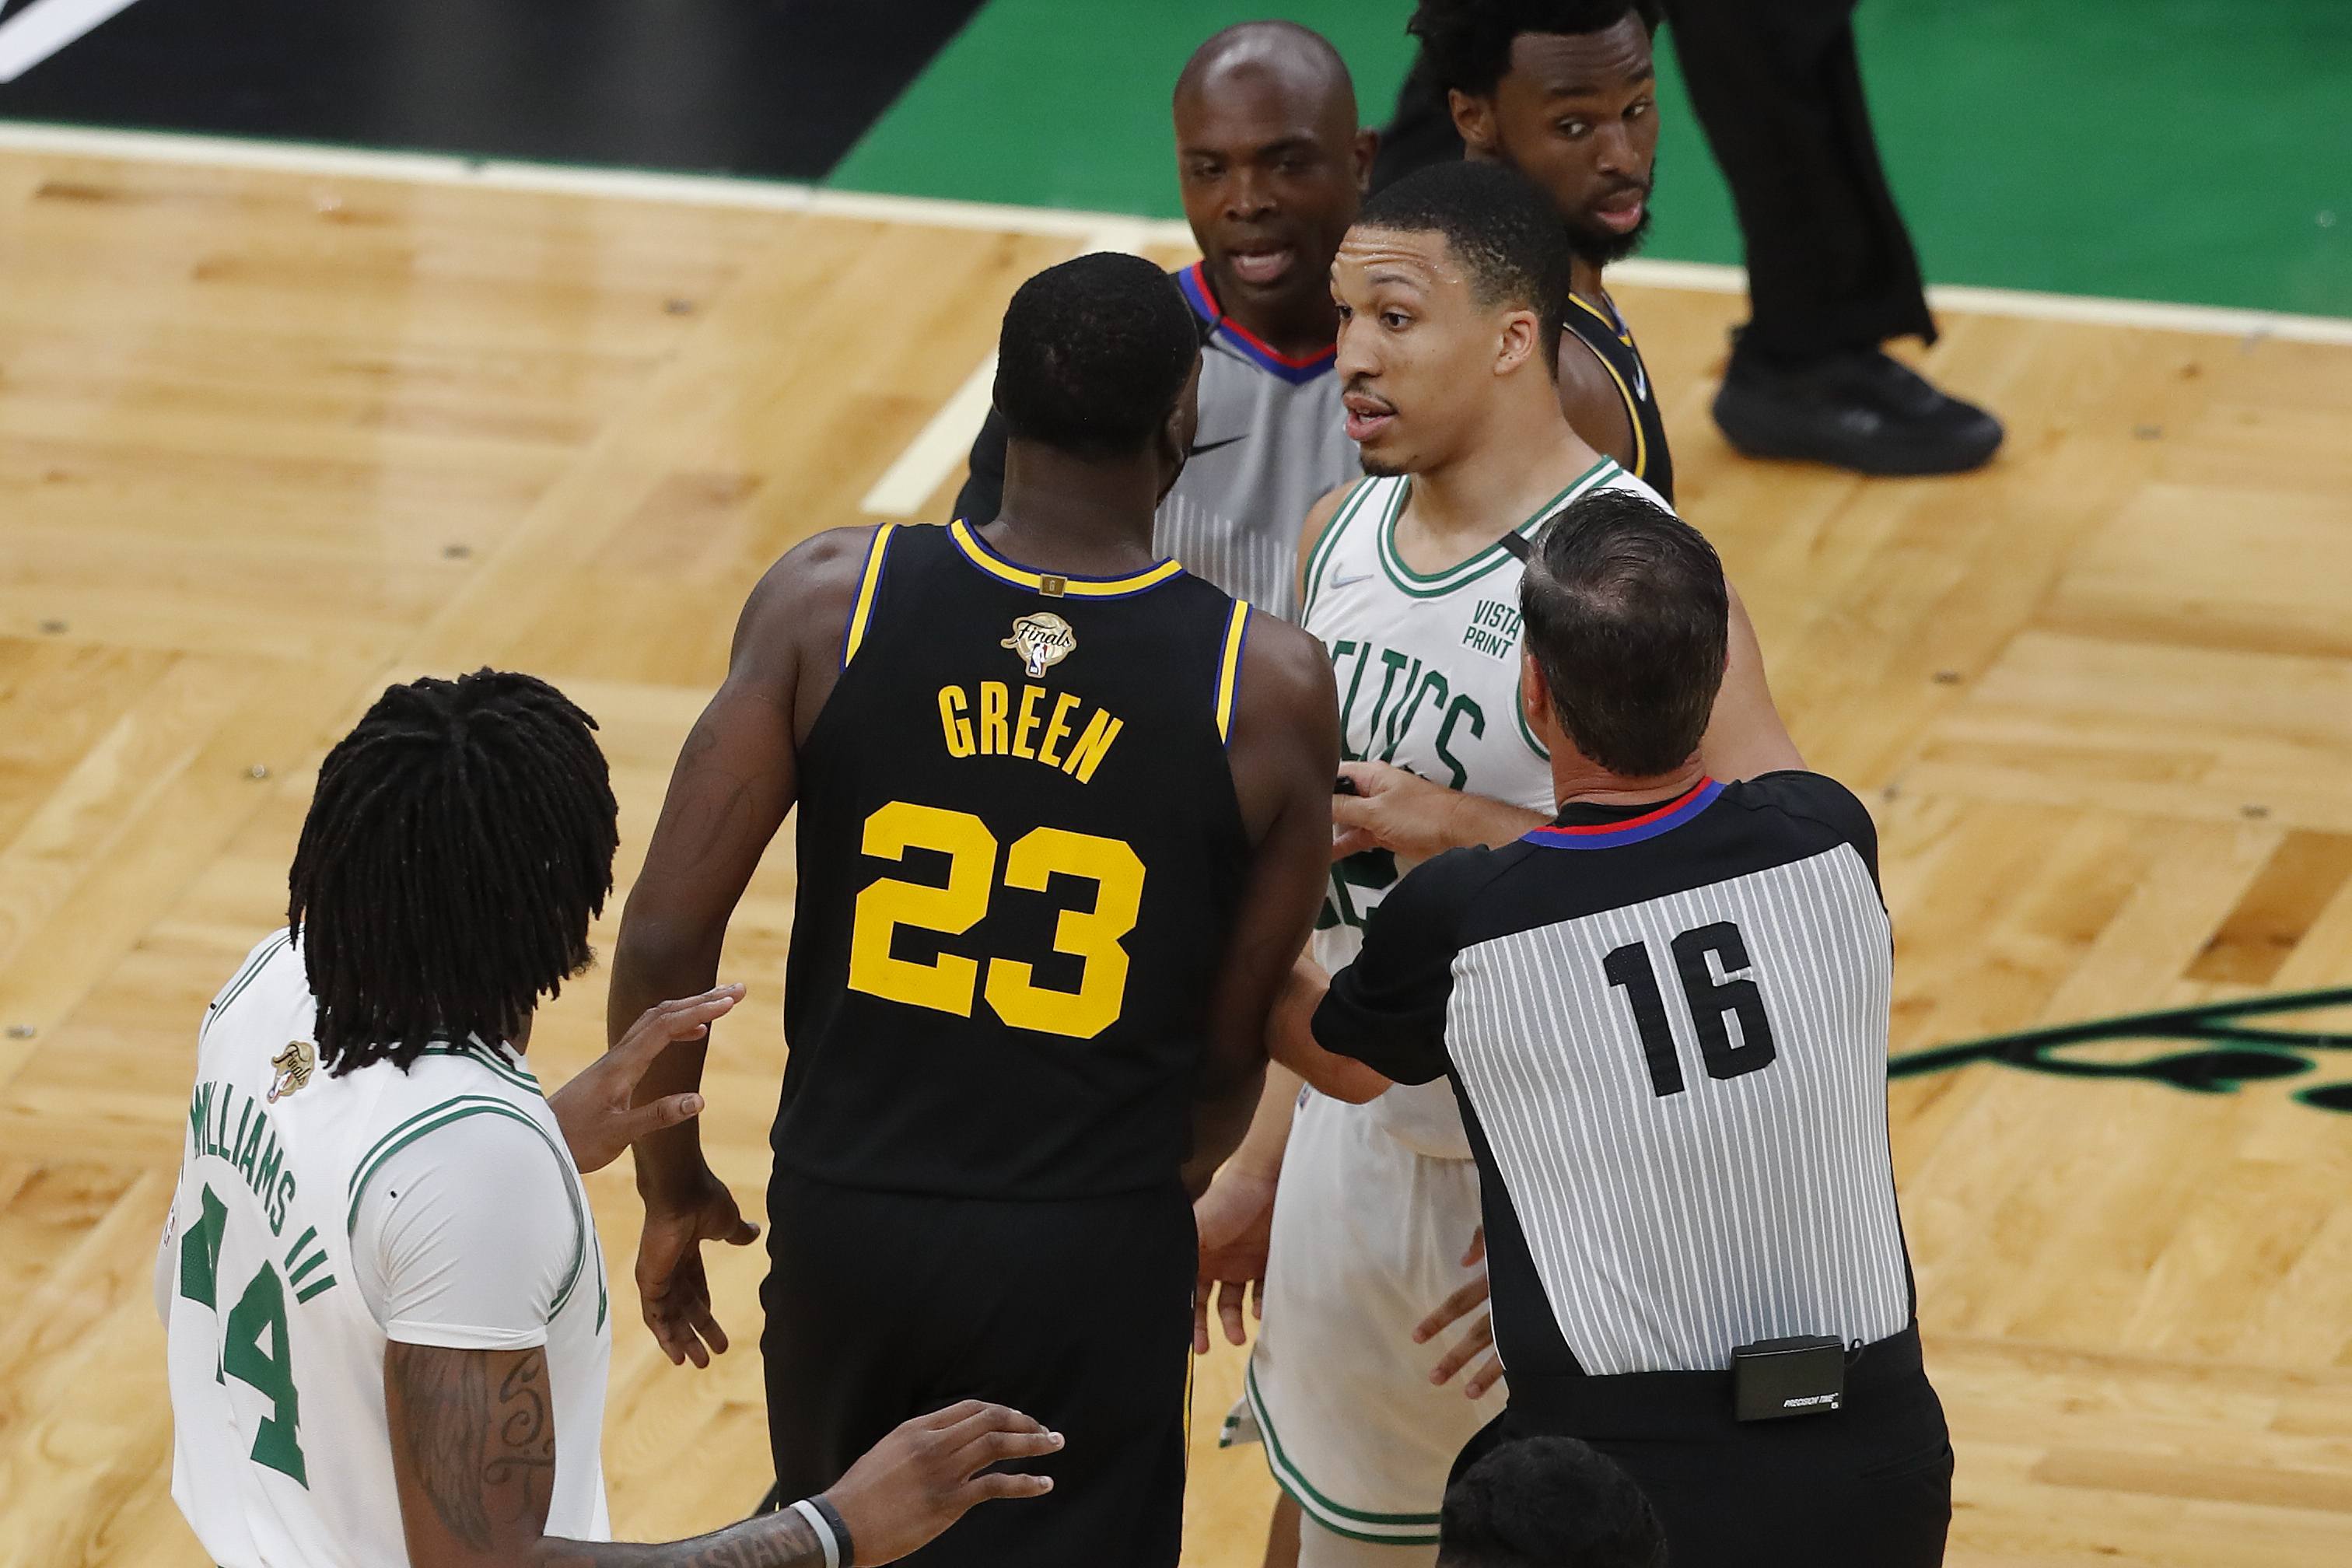 Draymond Green trash talks Grant Williams in Game 2 win over Celtics:  'You're not me, you want to be me' 